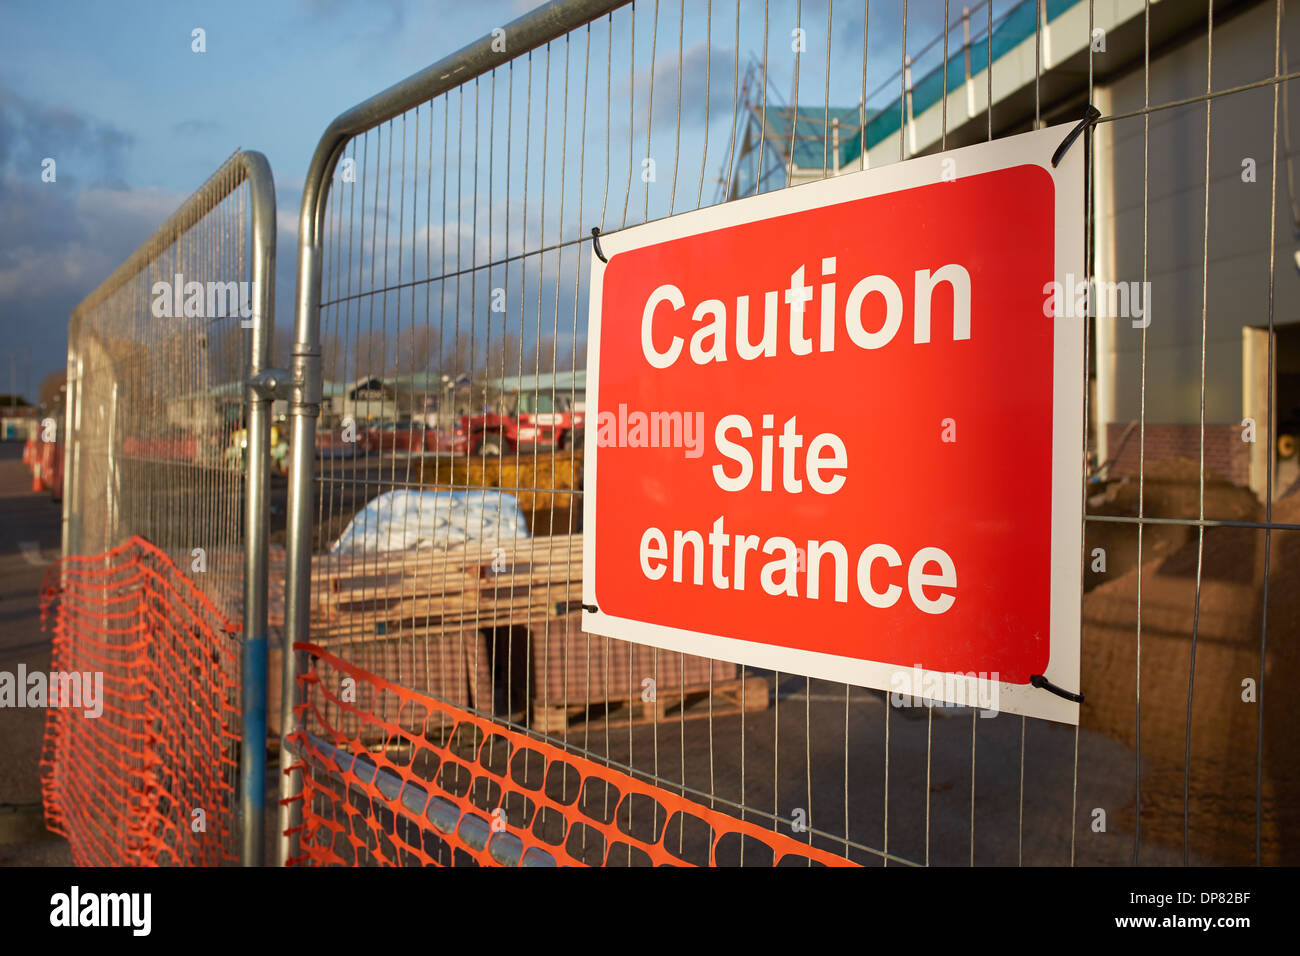 Caution Site Entrance notice of the fence of a building site Stock Photo